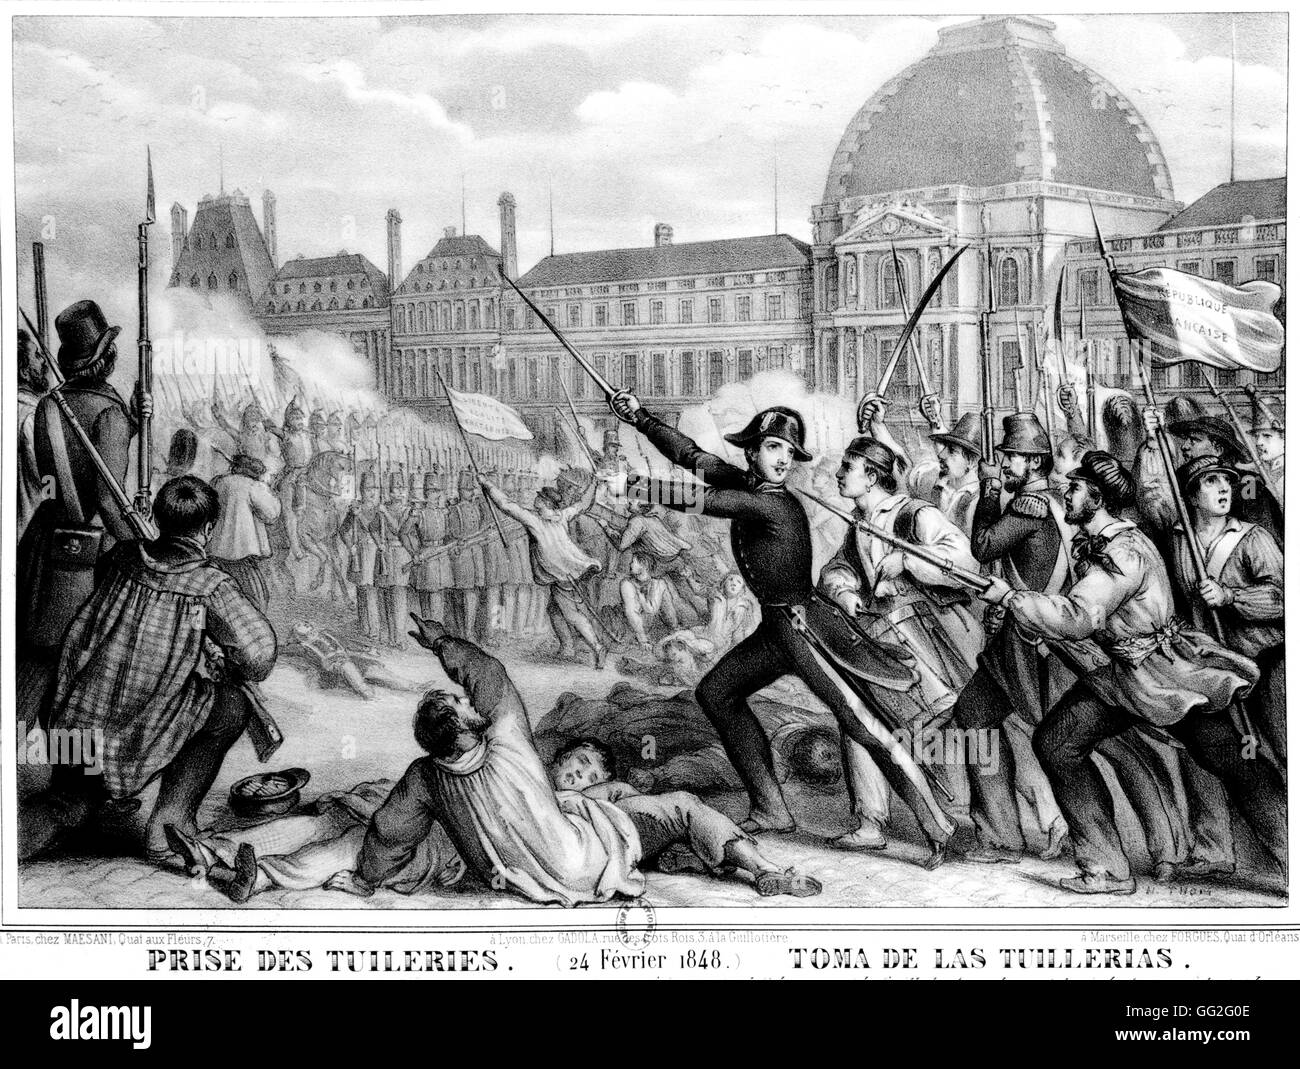 Storming of the Tuileries on February 24, 1848 Paris, Bibliotheque Nationale de France Stock Photo